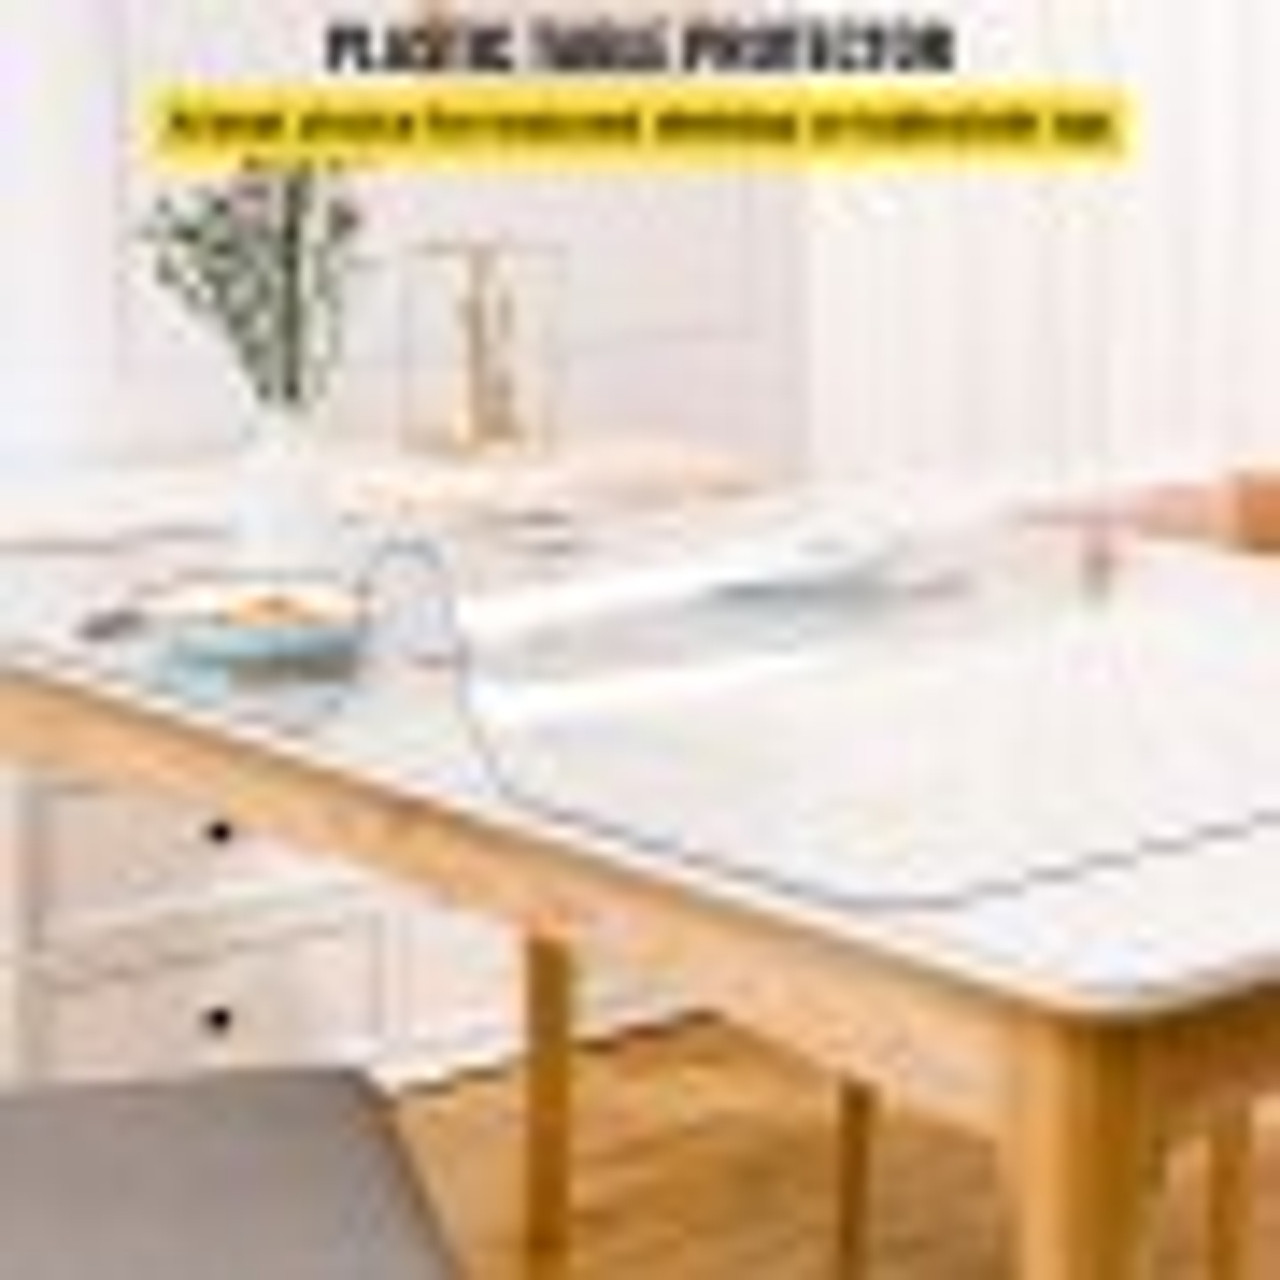 Plastic Table Cover 40 x 80 Inch, 1.5 mm Thick Clear Table Protector, Rectangle Clear Desk Mat, Waterproof & Easy Cleaning for Office Dresser Night Stand